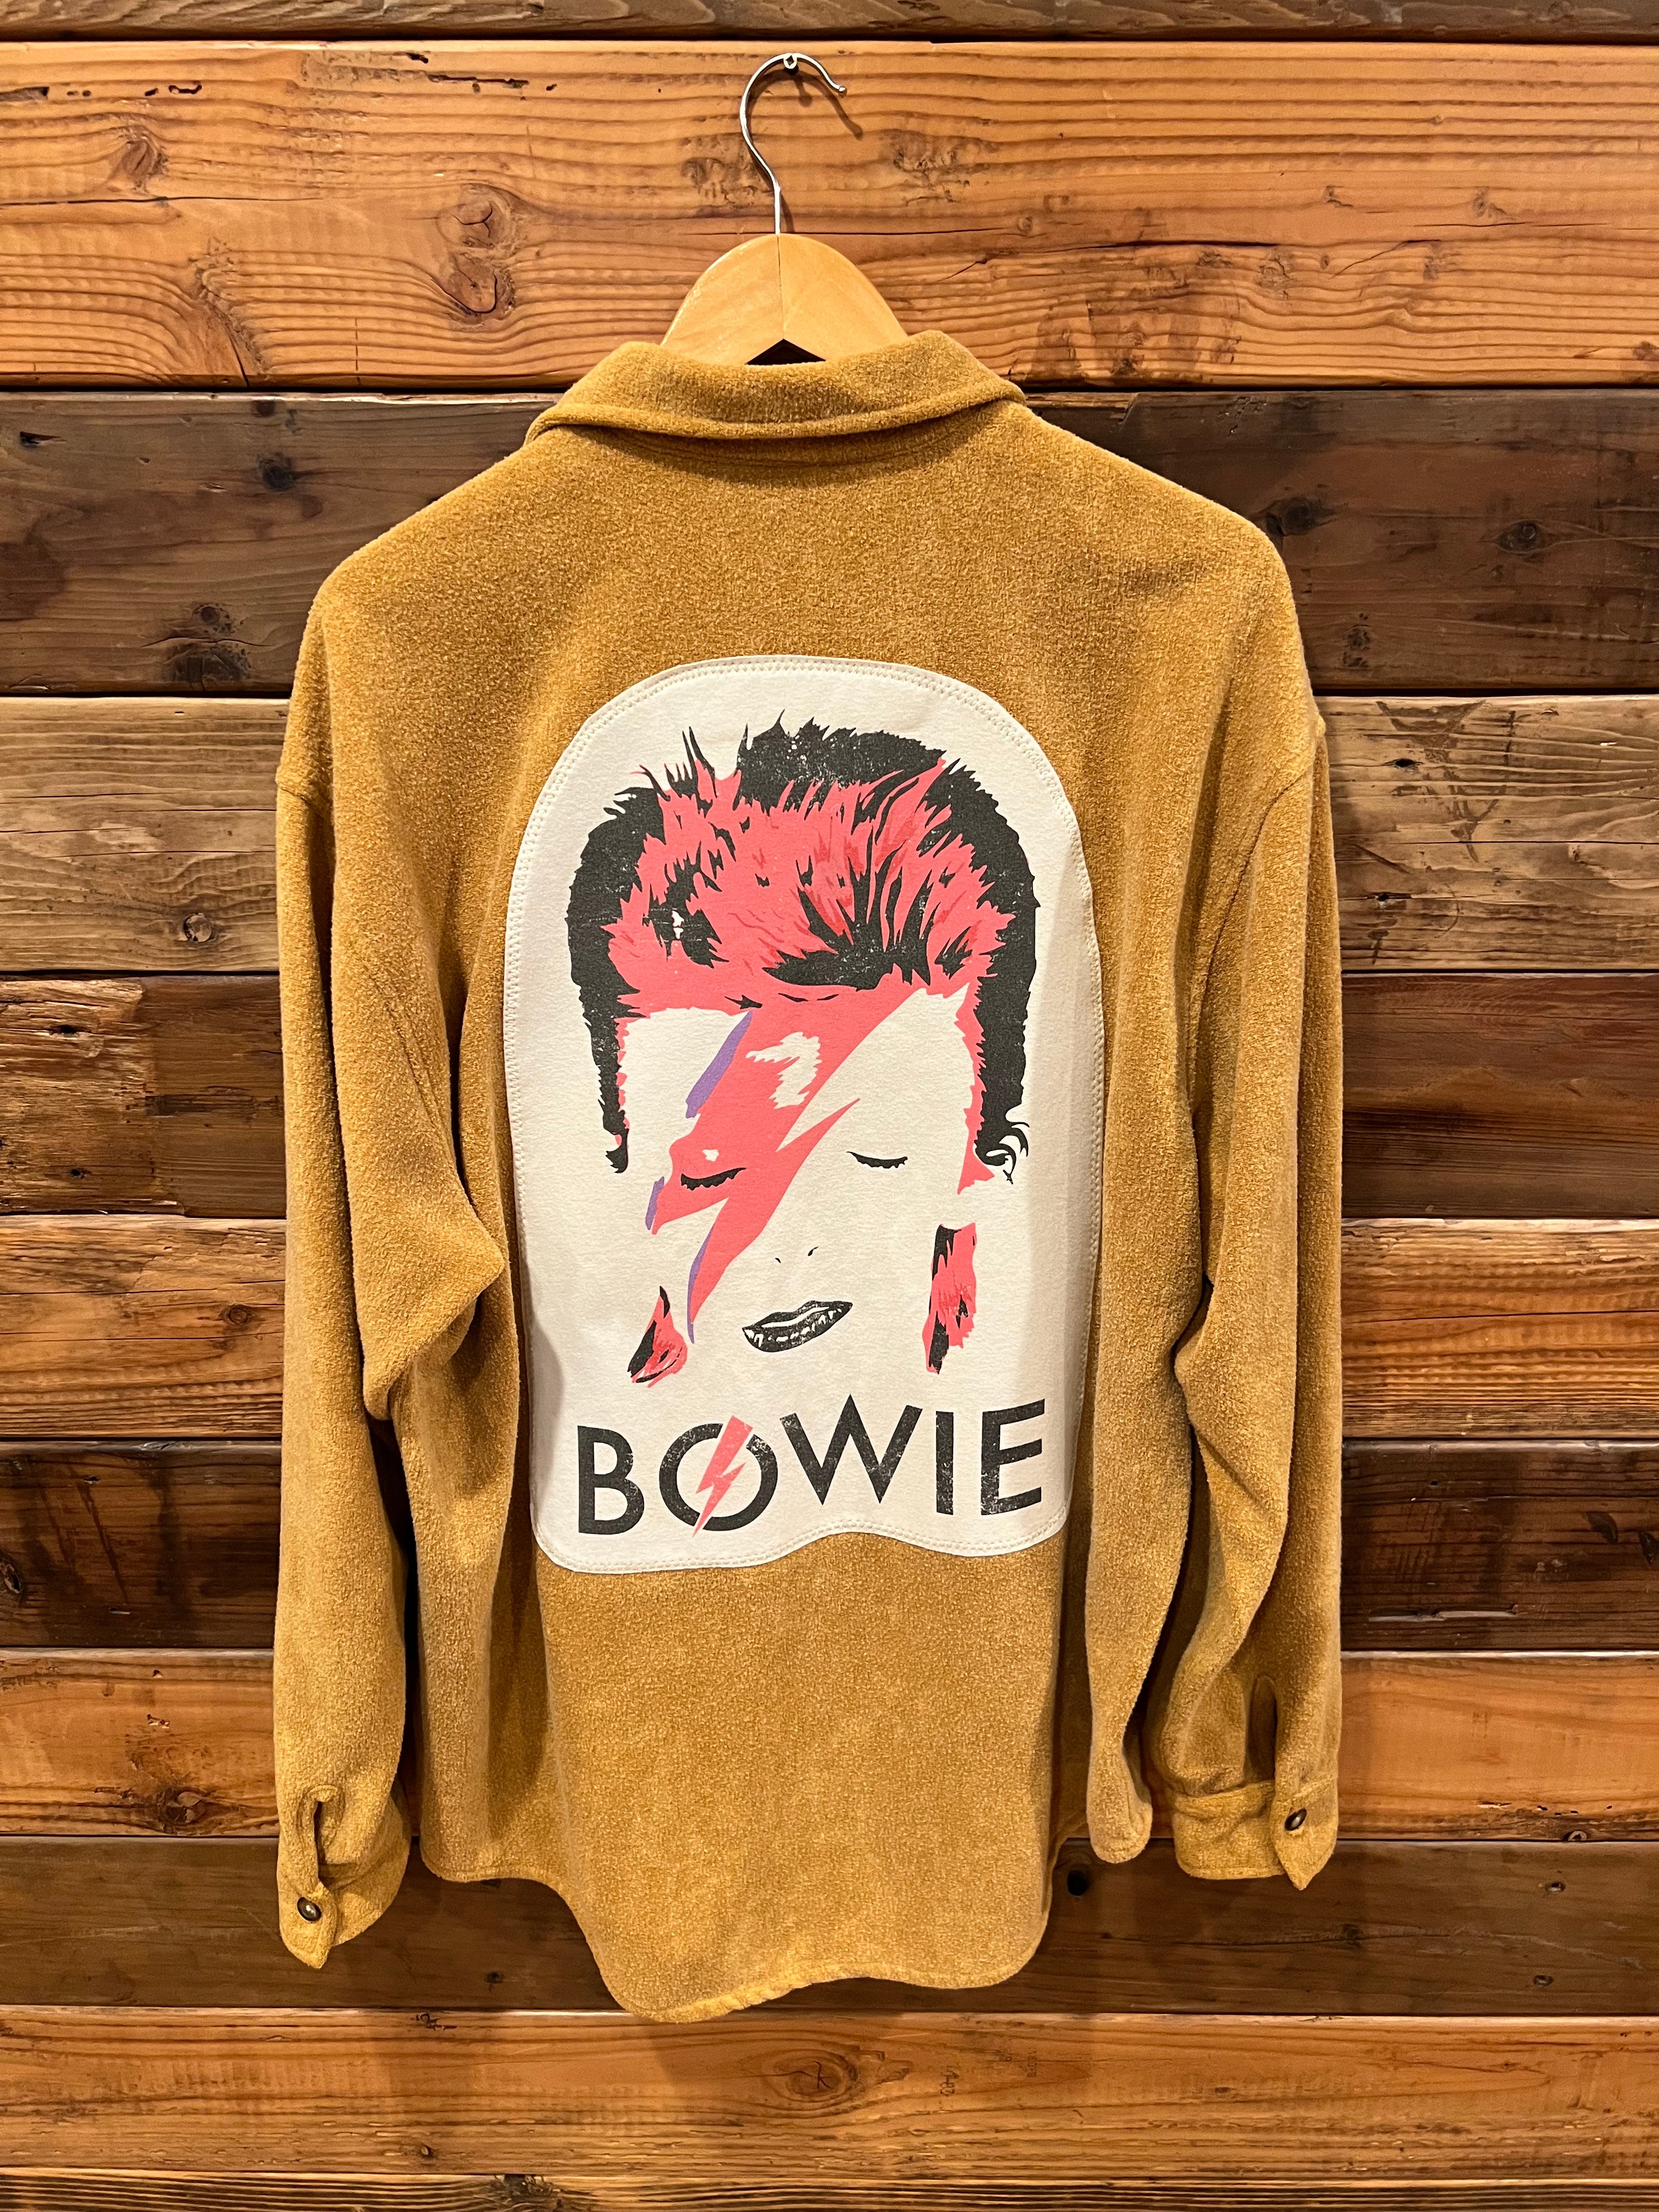 Vintage one of a kind David Bowie terry mid-weight over-sized shirt, MadAndie custom shirt